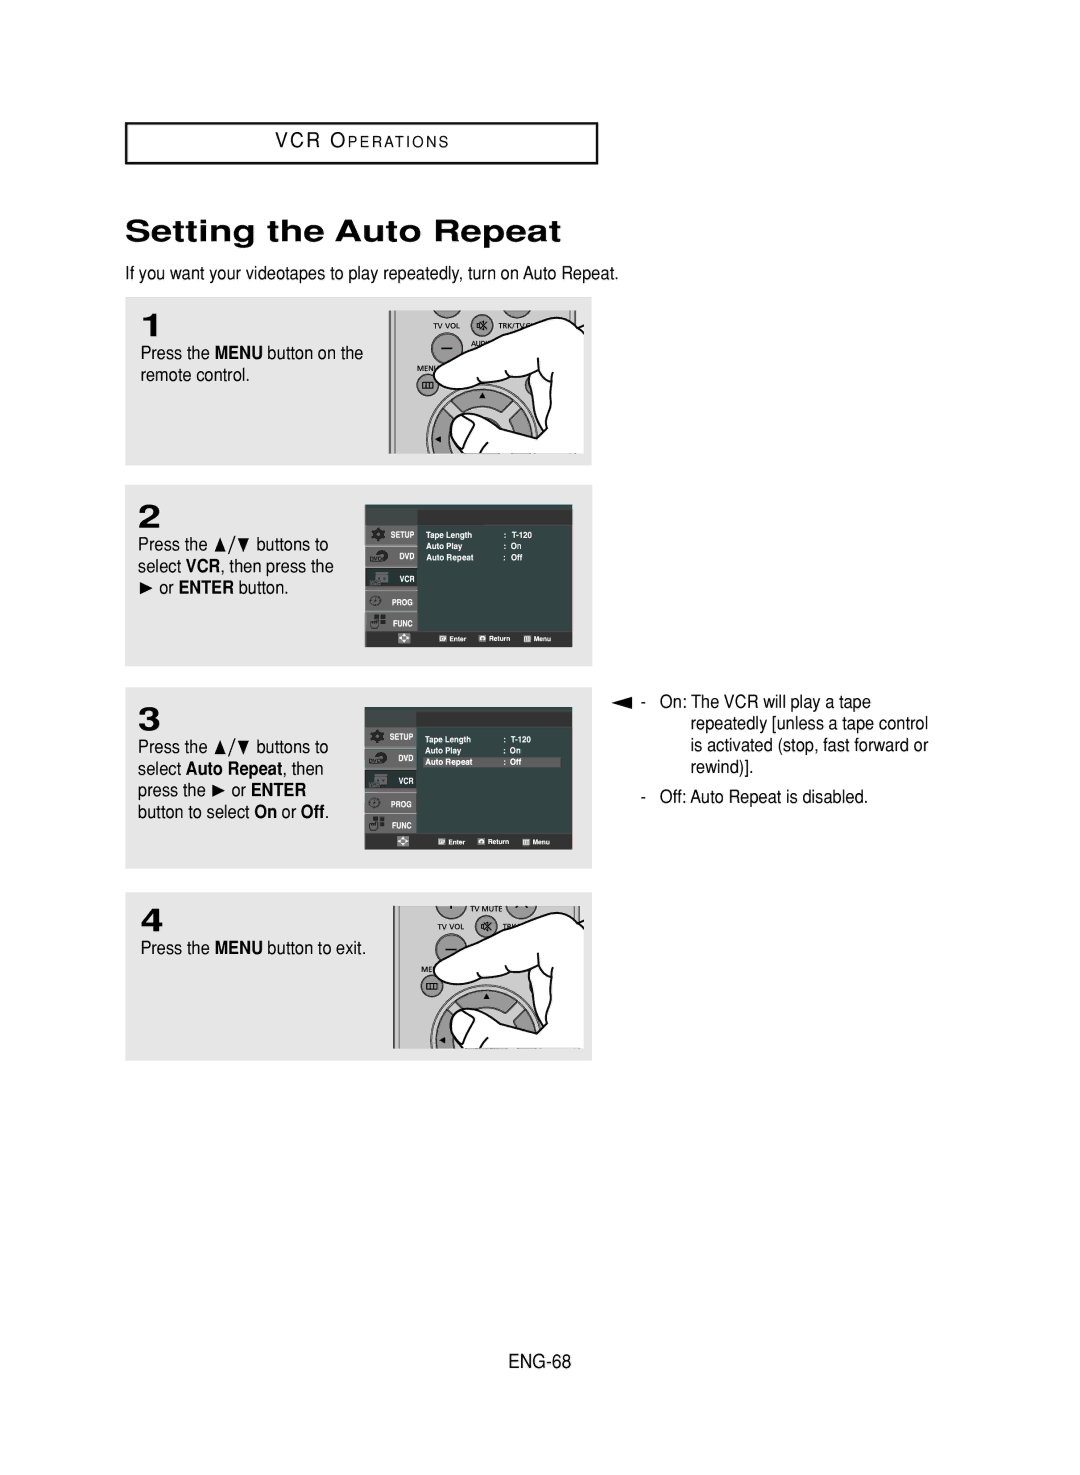 Samsung DVD-V9800 instruction manual Setting the Auto Repeat, ENG-68 